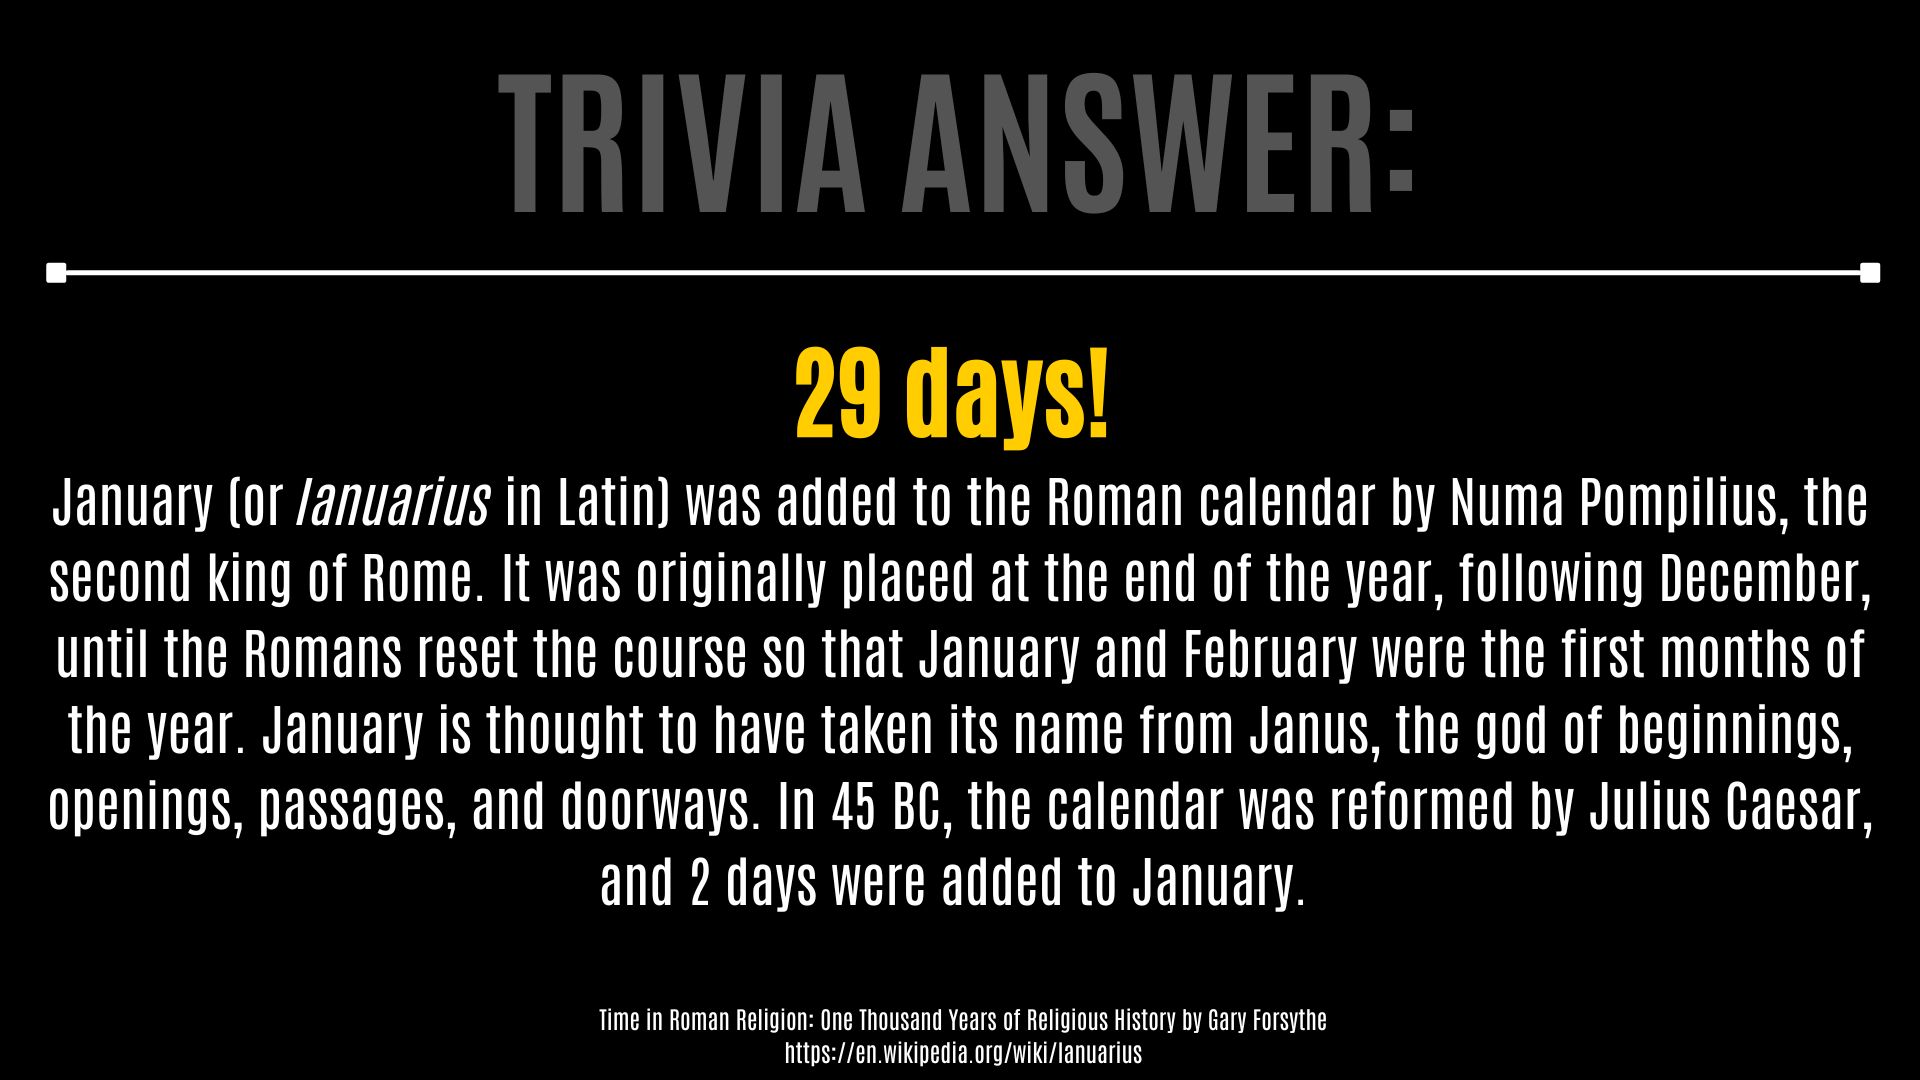 Trivia Answer: 29 days!  January (or Ianuarius in Latin) was added to the Roman calendar by Numa Pompilius, the second king of Rome. It was originally placed at the end of the year, following December, until the Romans reset the course so that January and February were the first months of the year. January is thought to have taken its name from Janus, the god of beginnings, openings, passages, and doorways. In 45 BC, the calendar was reformed by Julius Caesar, and 2 days were added to January.